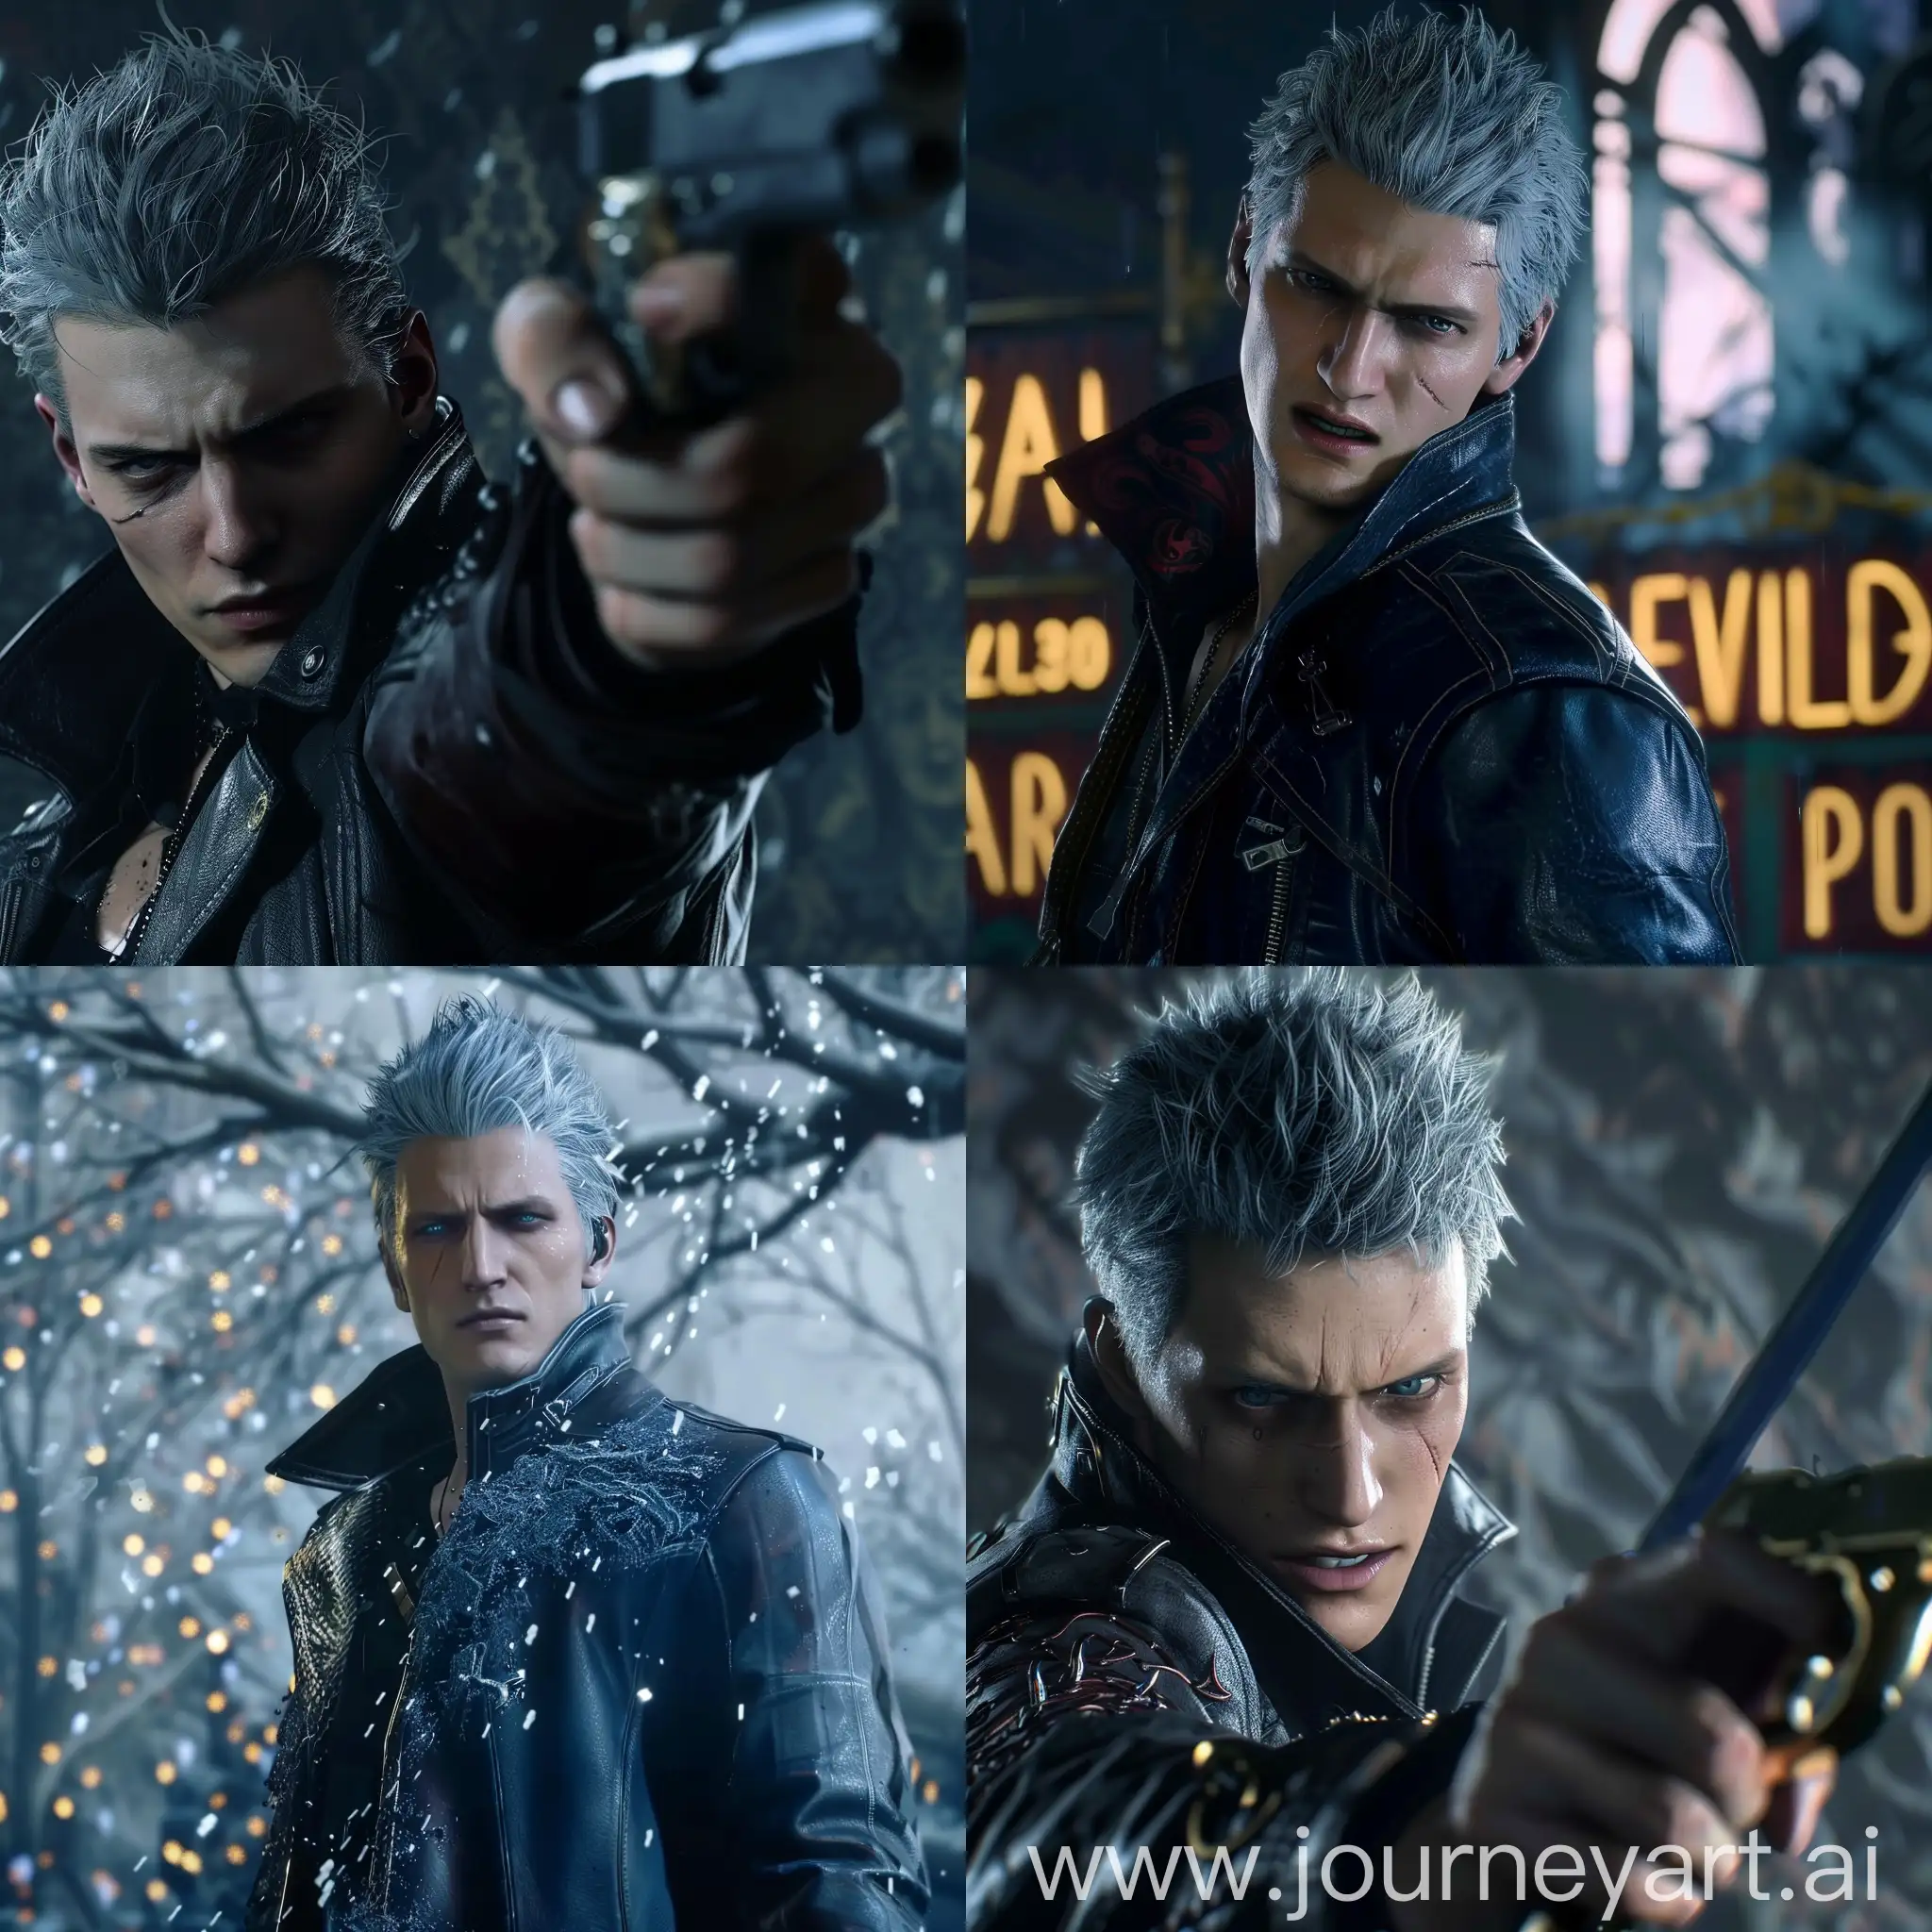 vergil provocation from devil may cry 5